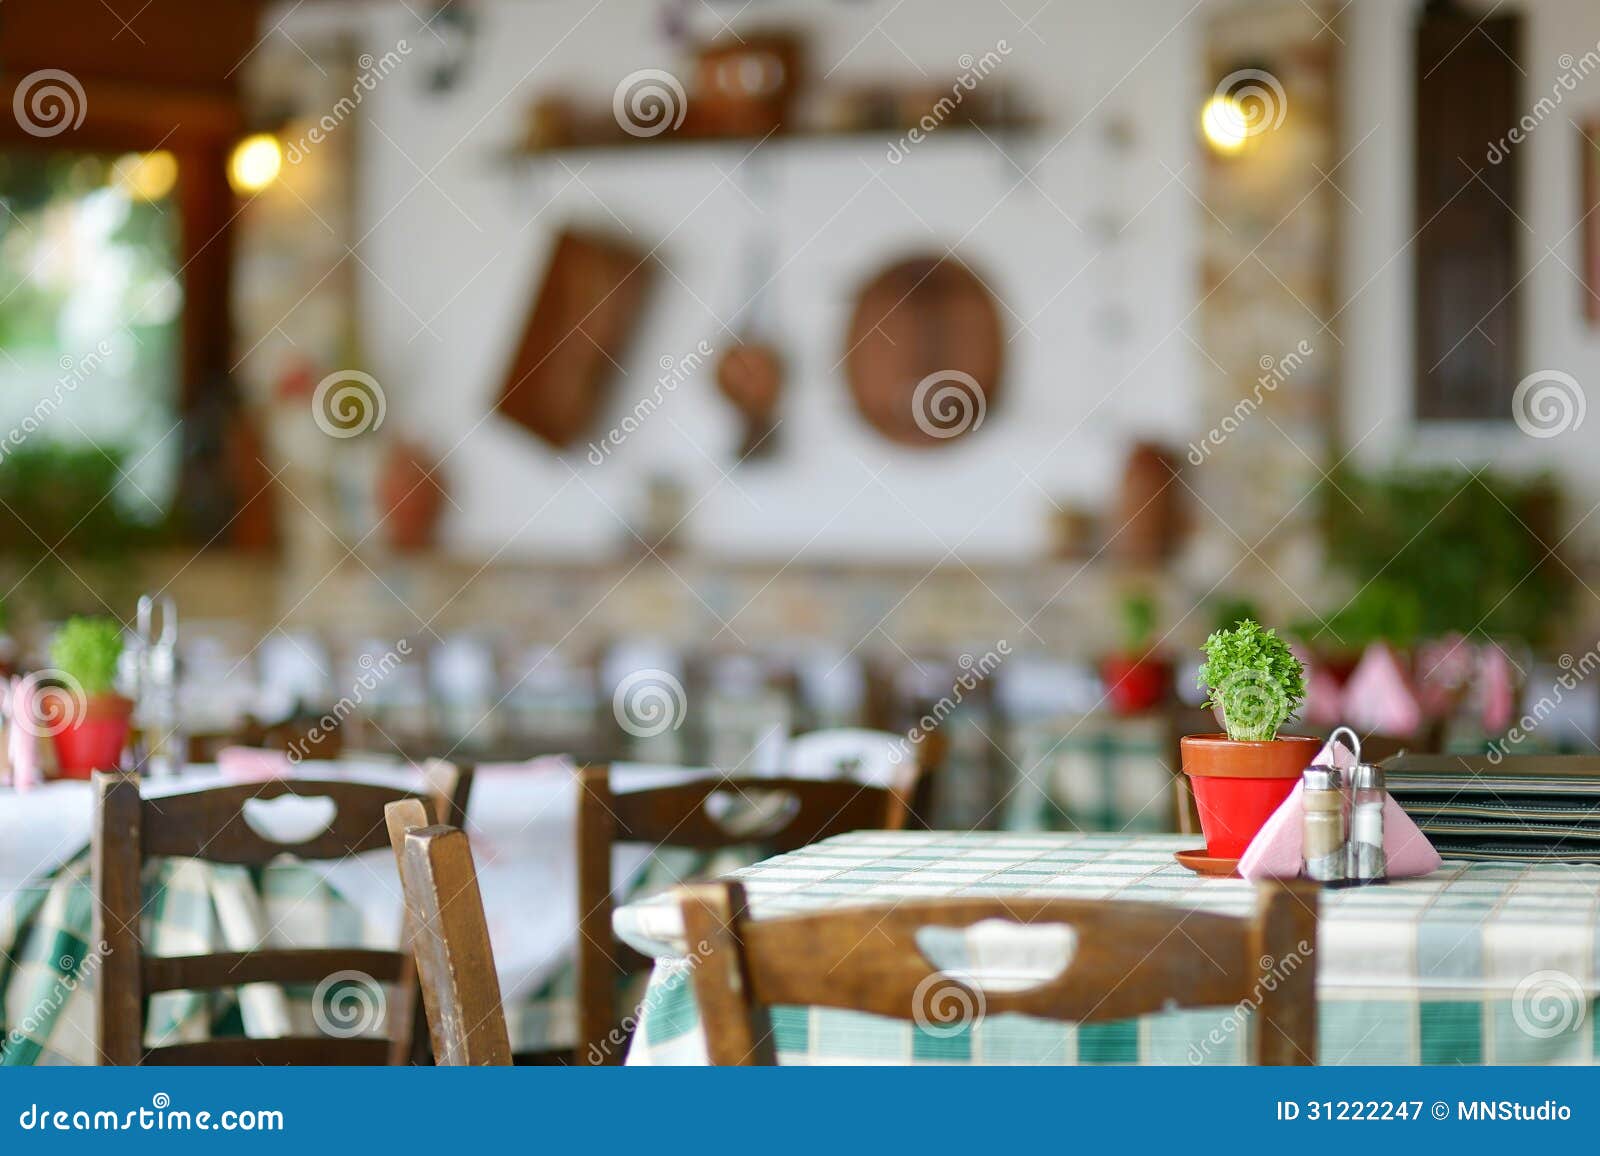 Beautiful Outdoor Cafe Royalty Free Stock Photography ...